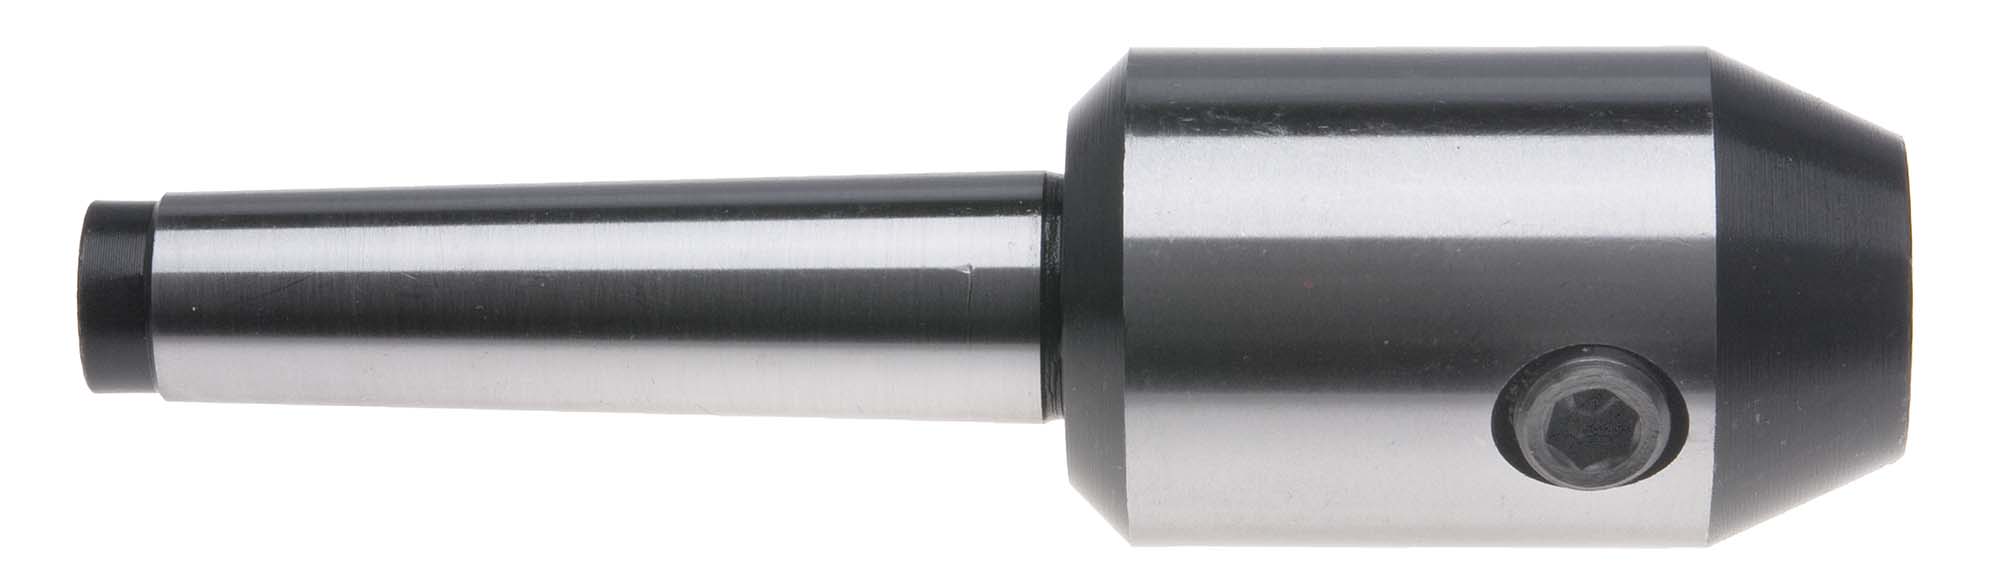 4 MT-7/8 End Mill Adapter with Drawbar End